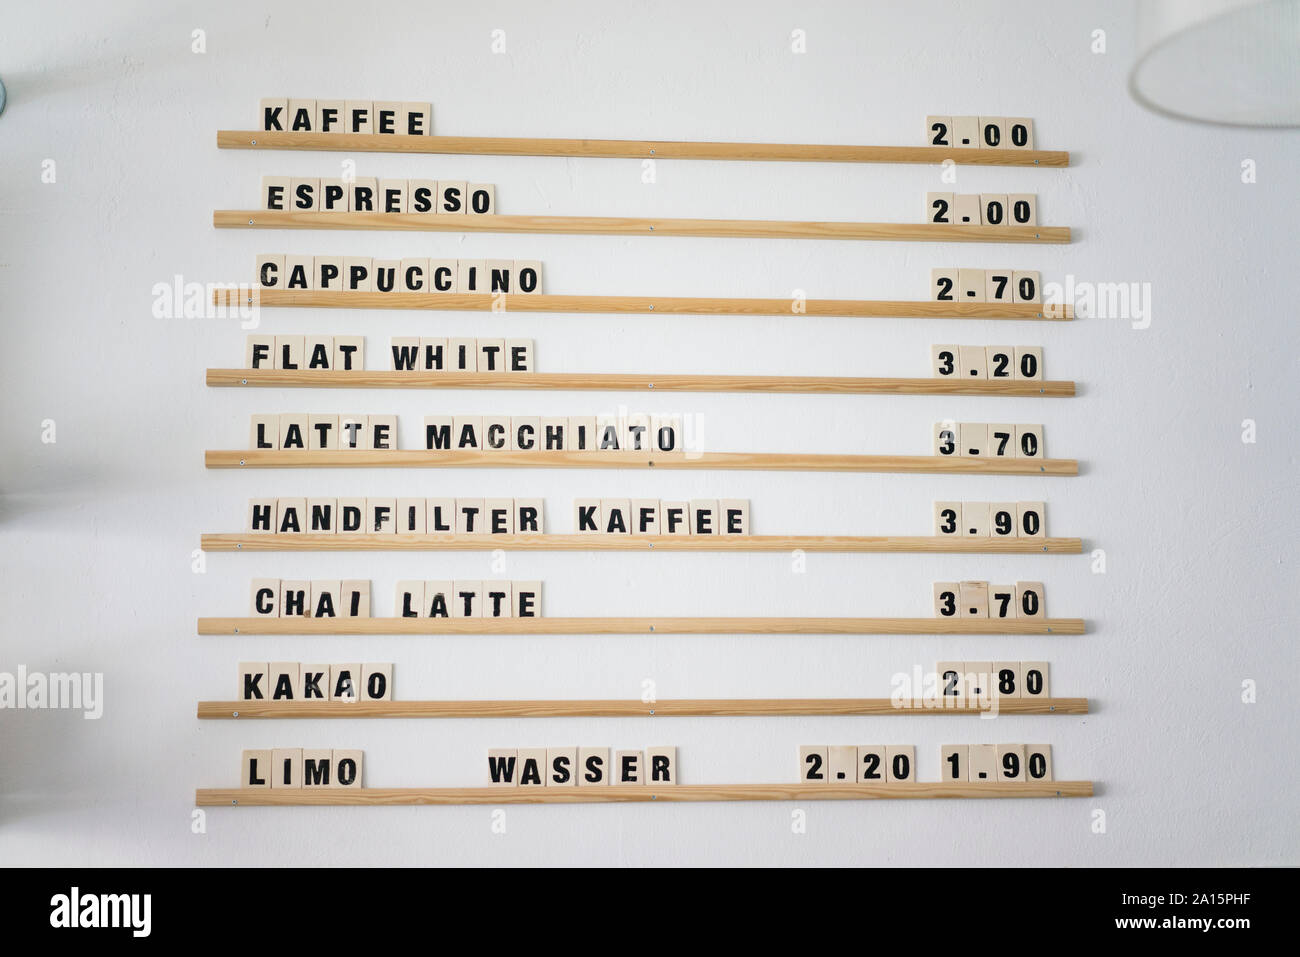 Price board for various coffees on offer in a coffee shop Stock Photo